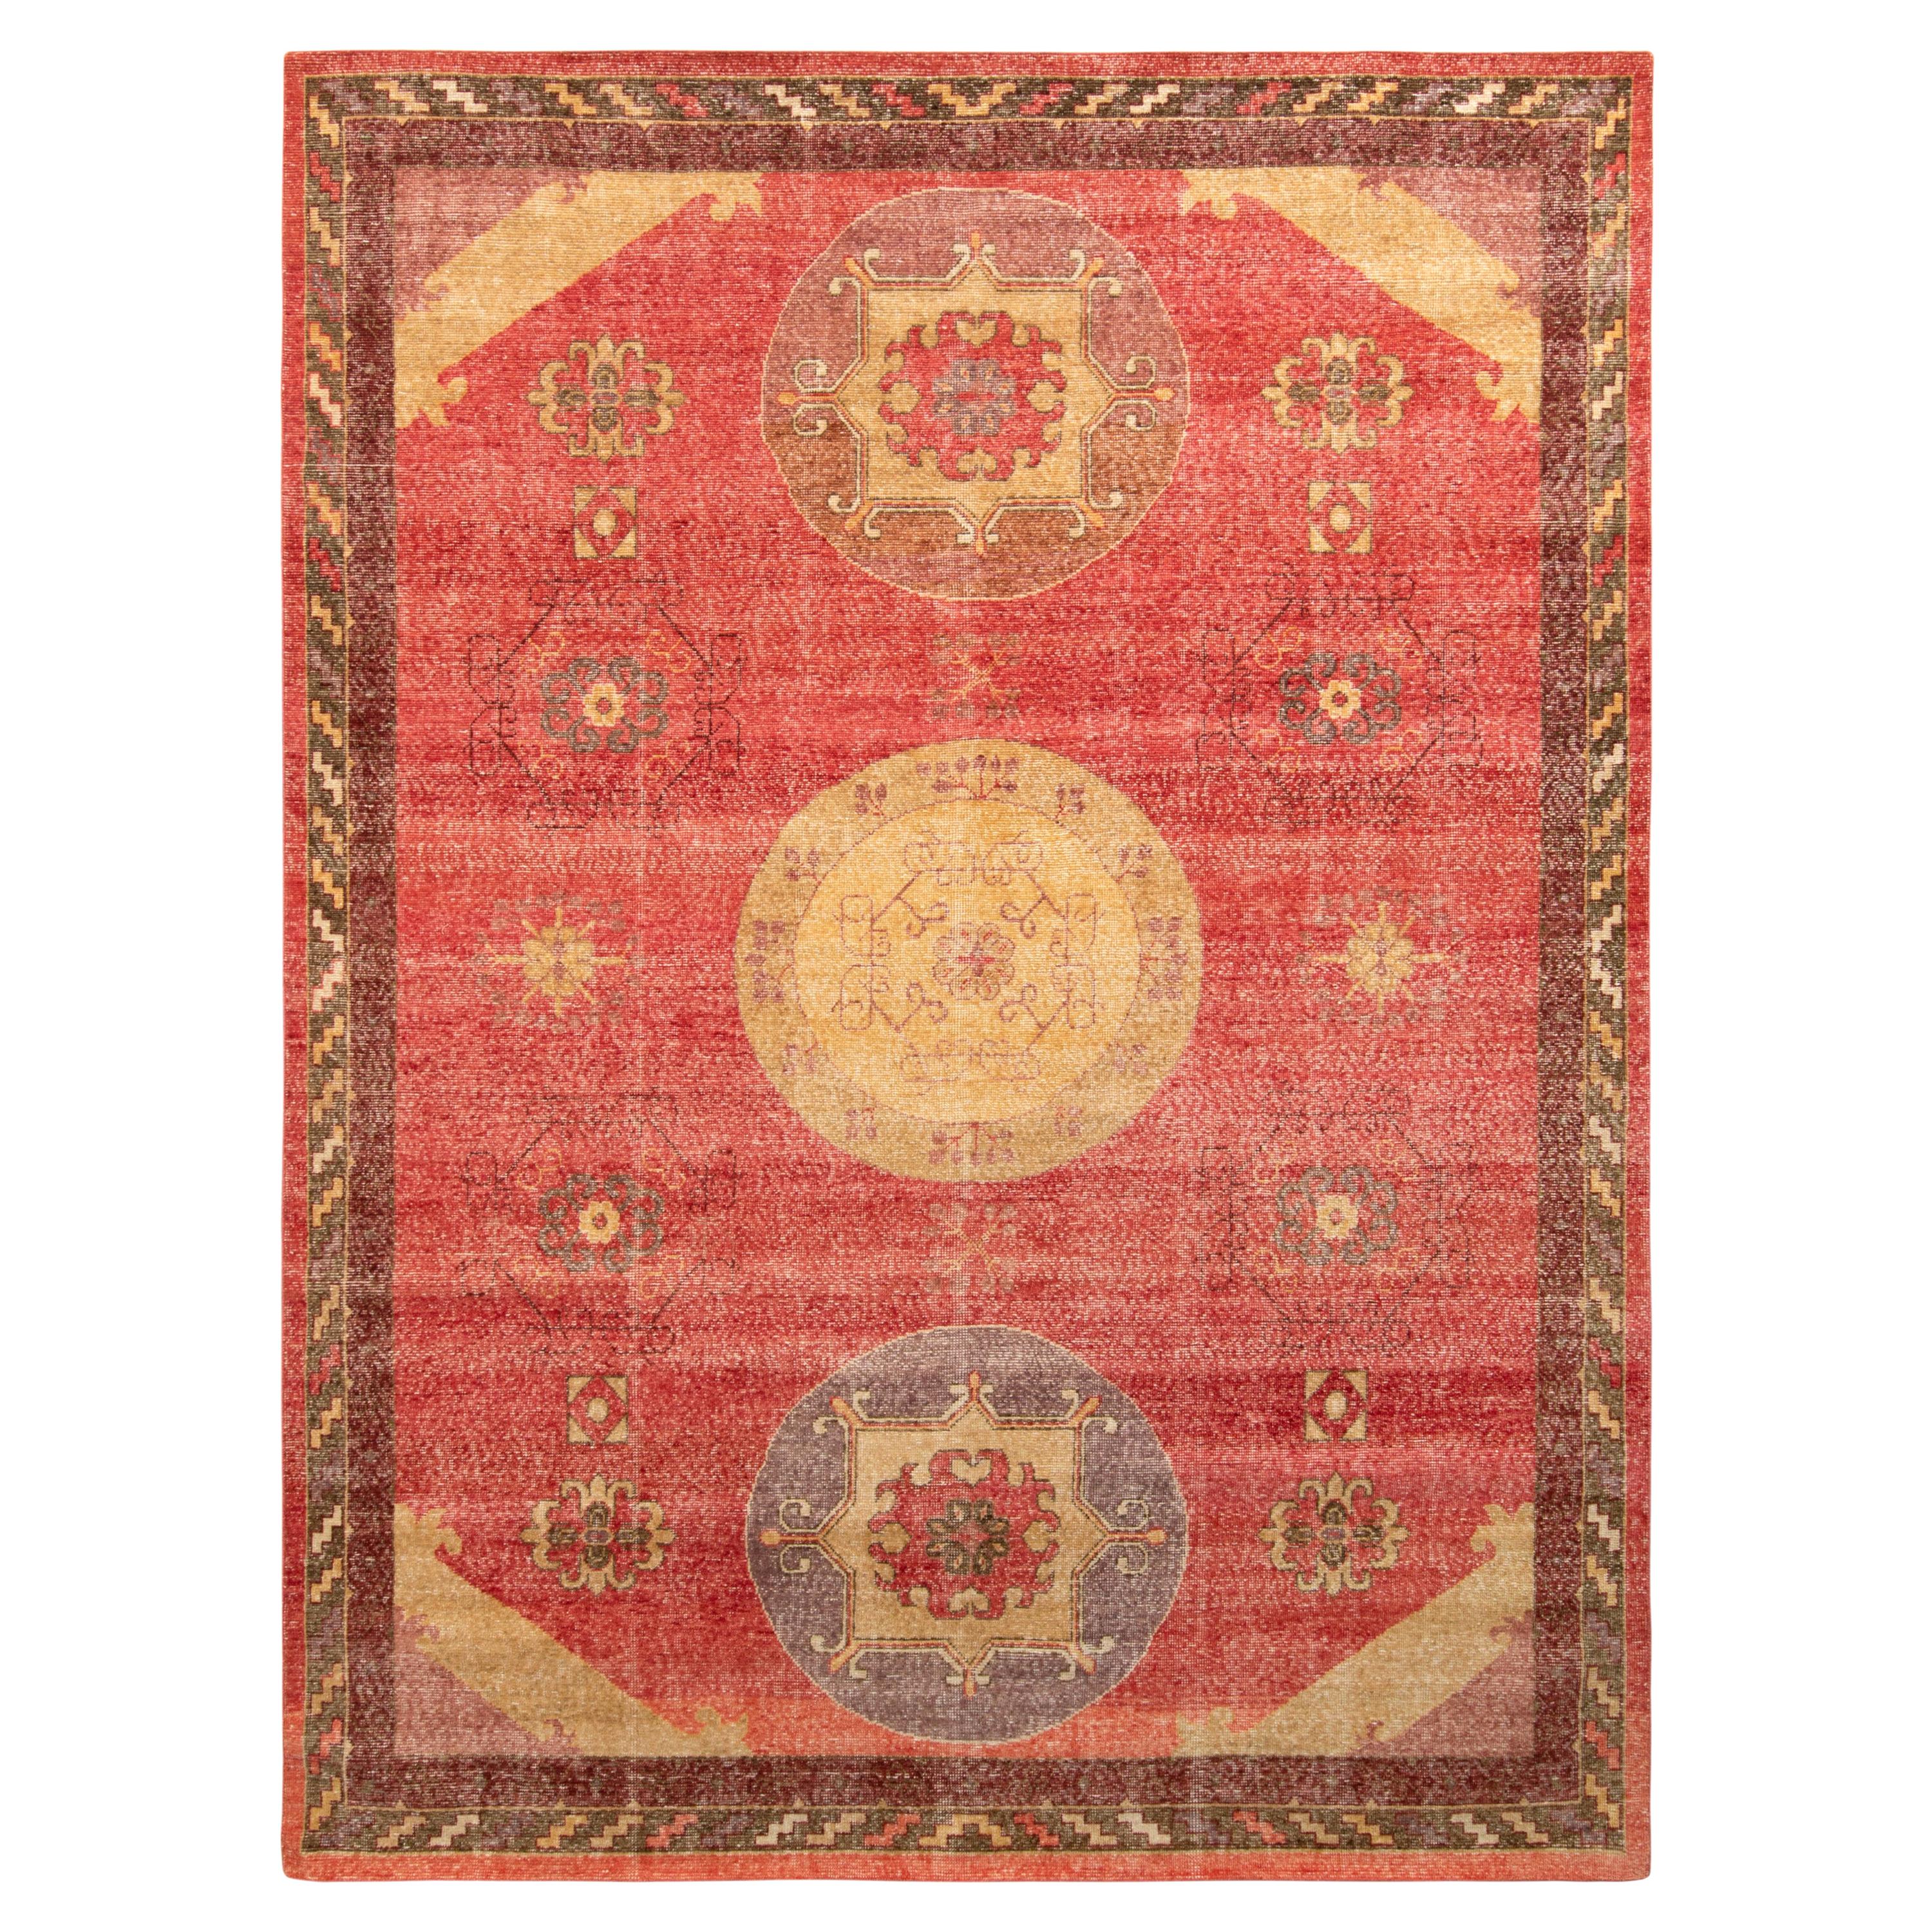 Rug & Kilim's Distressed Khotan Style Teppich in Rot, Beige Medaillon-Muster